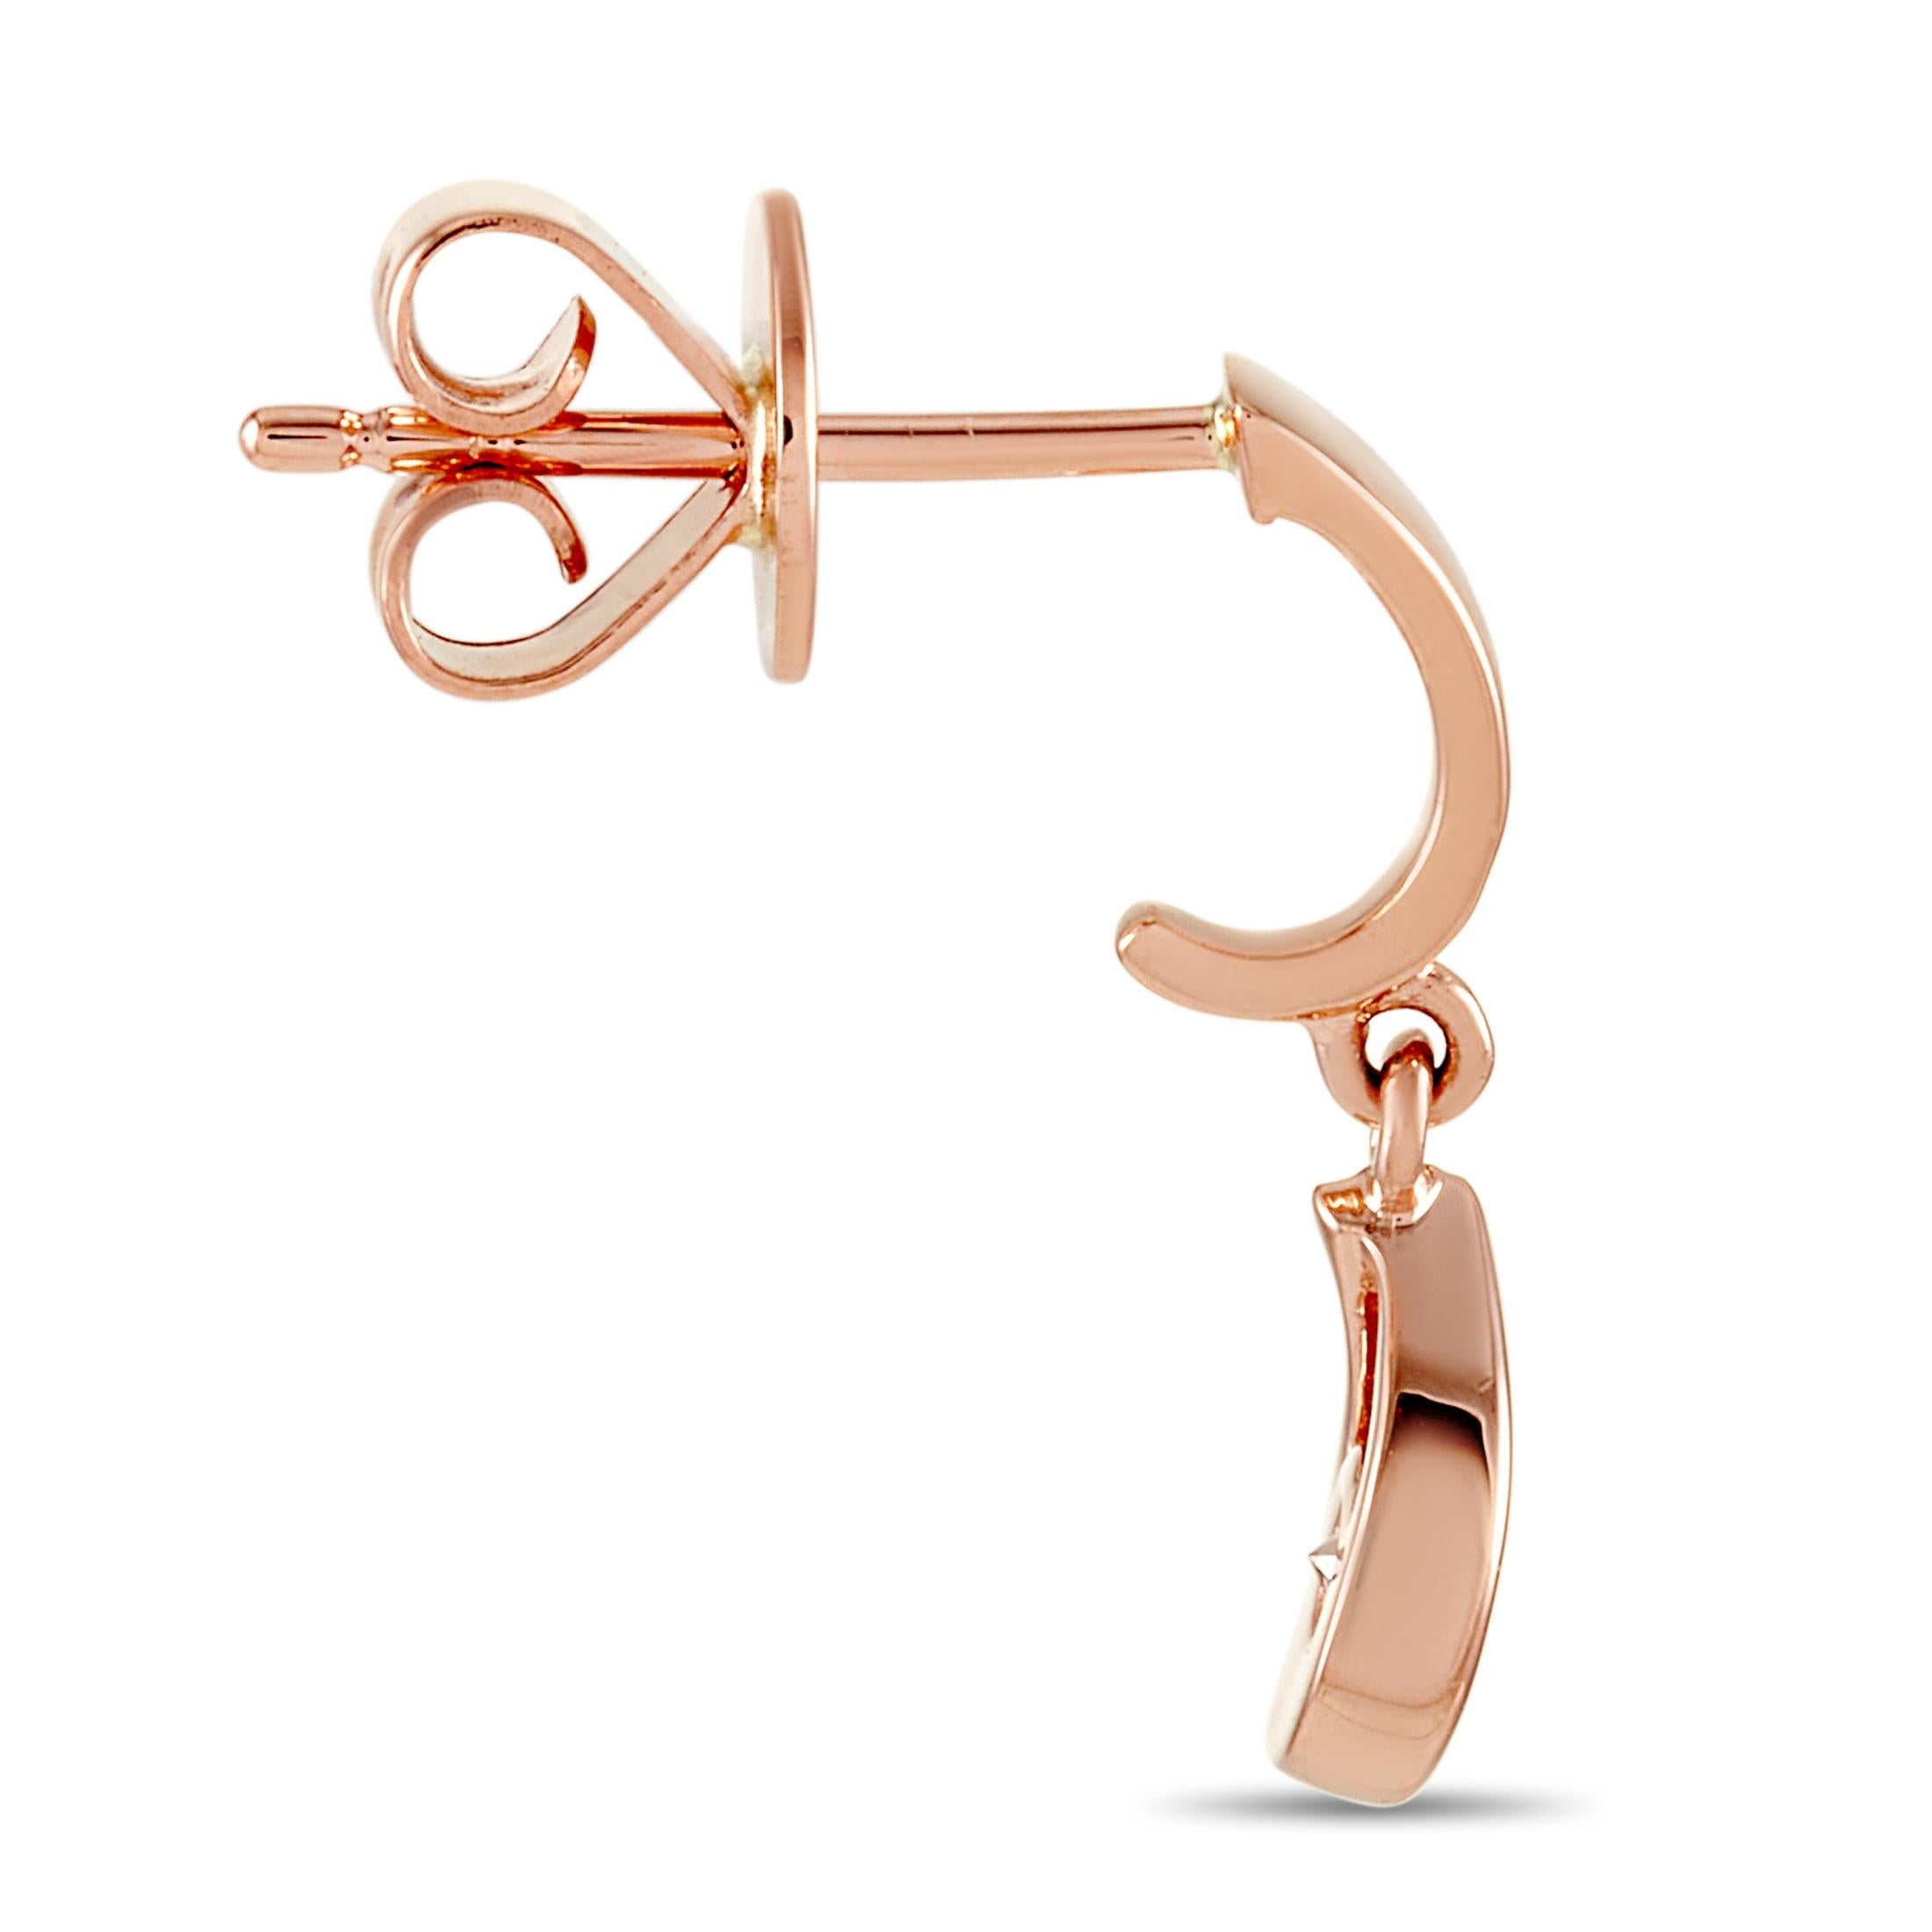 These LB Exclusive earrings are crafted from 14K rose gold and each of the two weighs 0.95 grams. They measure 0.59” in length and 0.20” in width. The pair is set with diamonds that total 0.20 carats.
 
 The earrings are offered in brand new